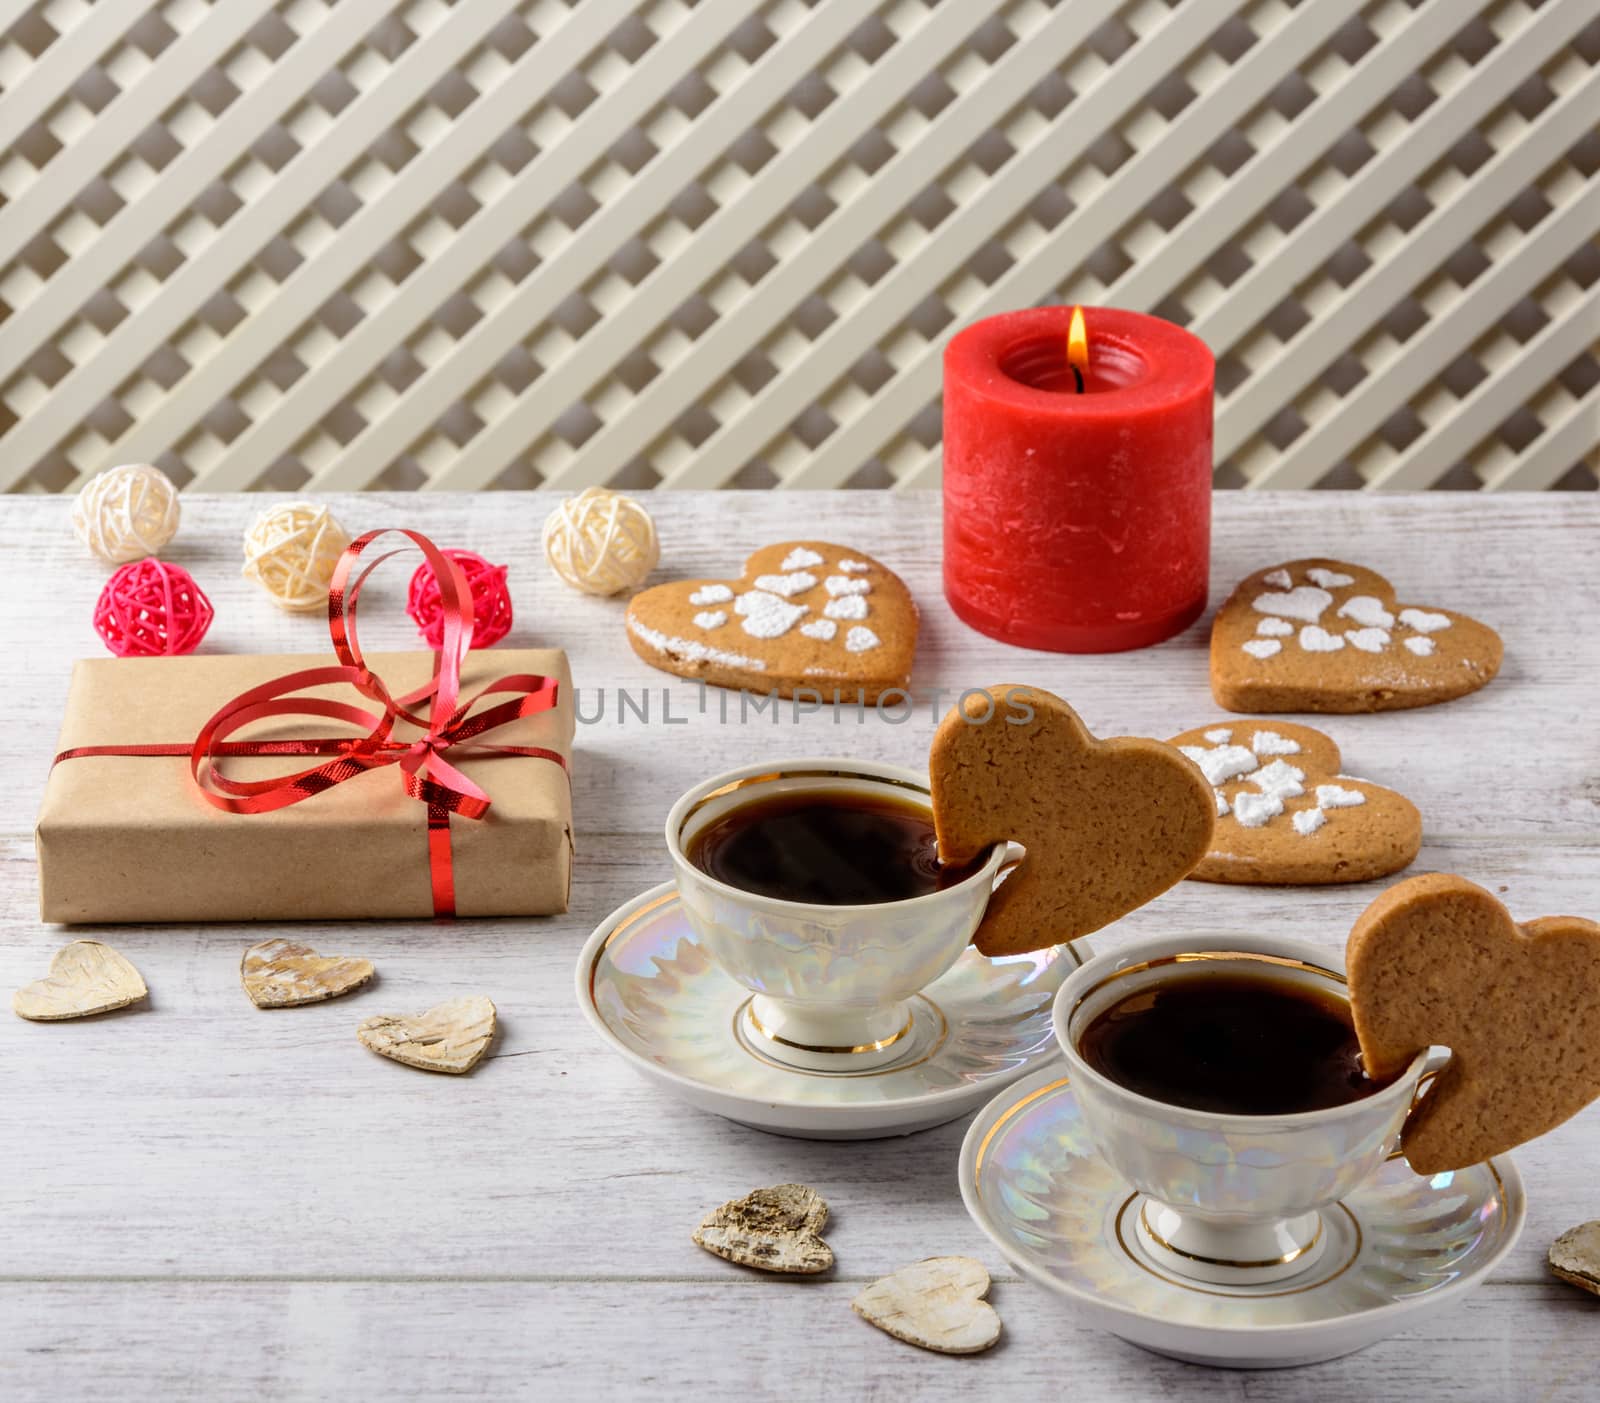 Box with a present to the Valentine's Day cookies in the shape of a heart and cups of black coffee on the white table